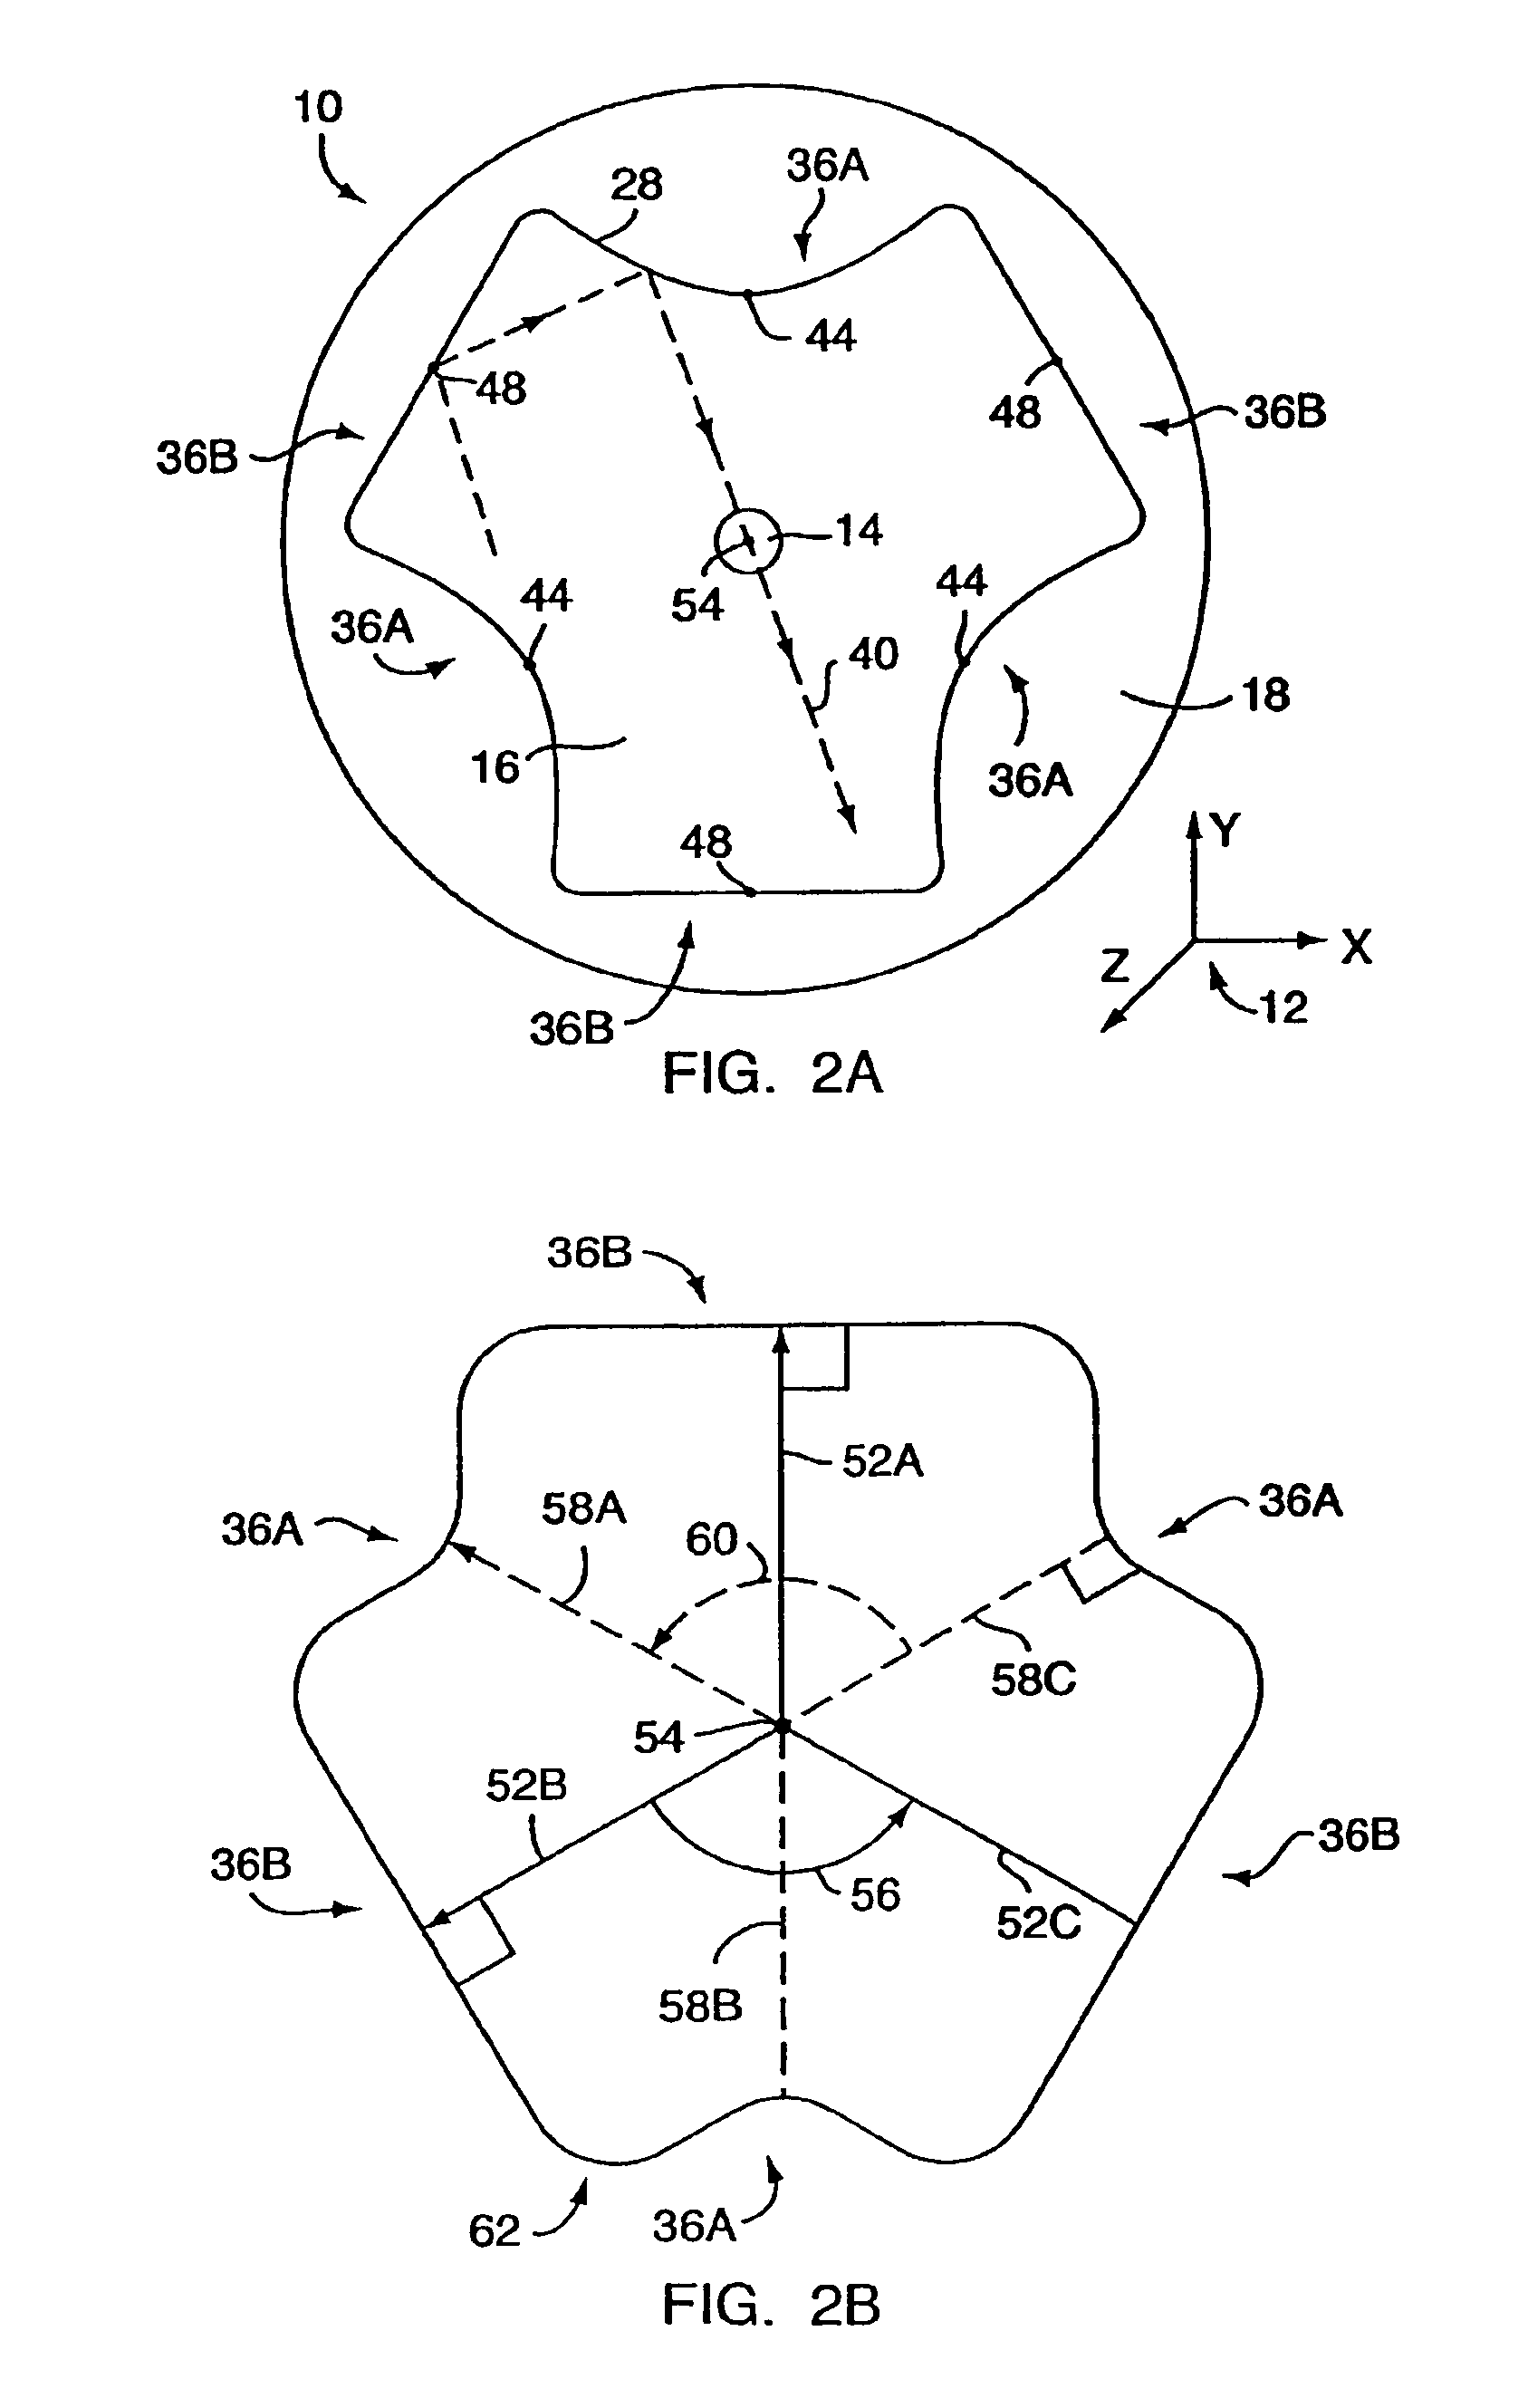 Cladding-pumped optical fiber and methods for fabricating